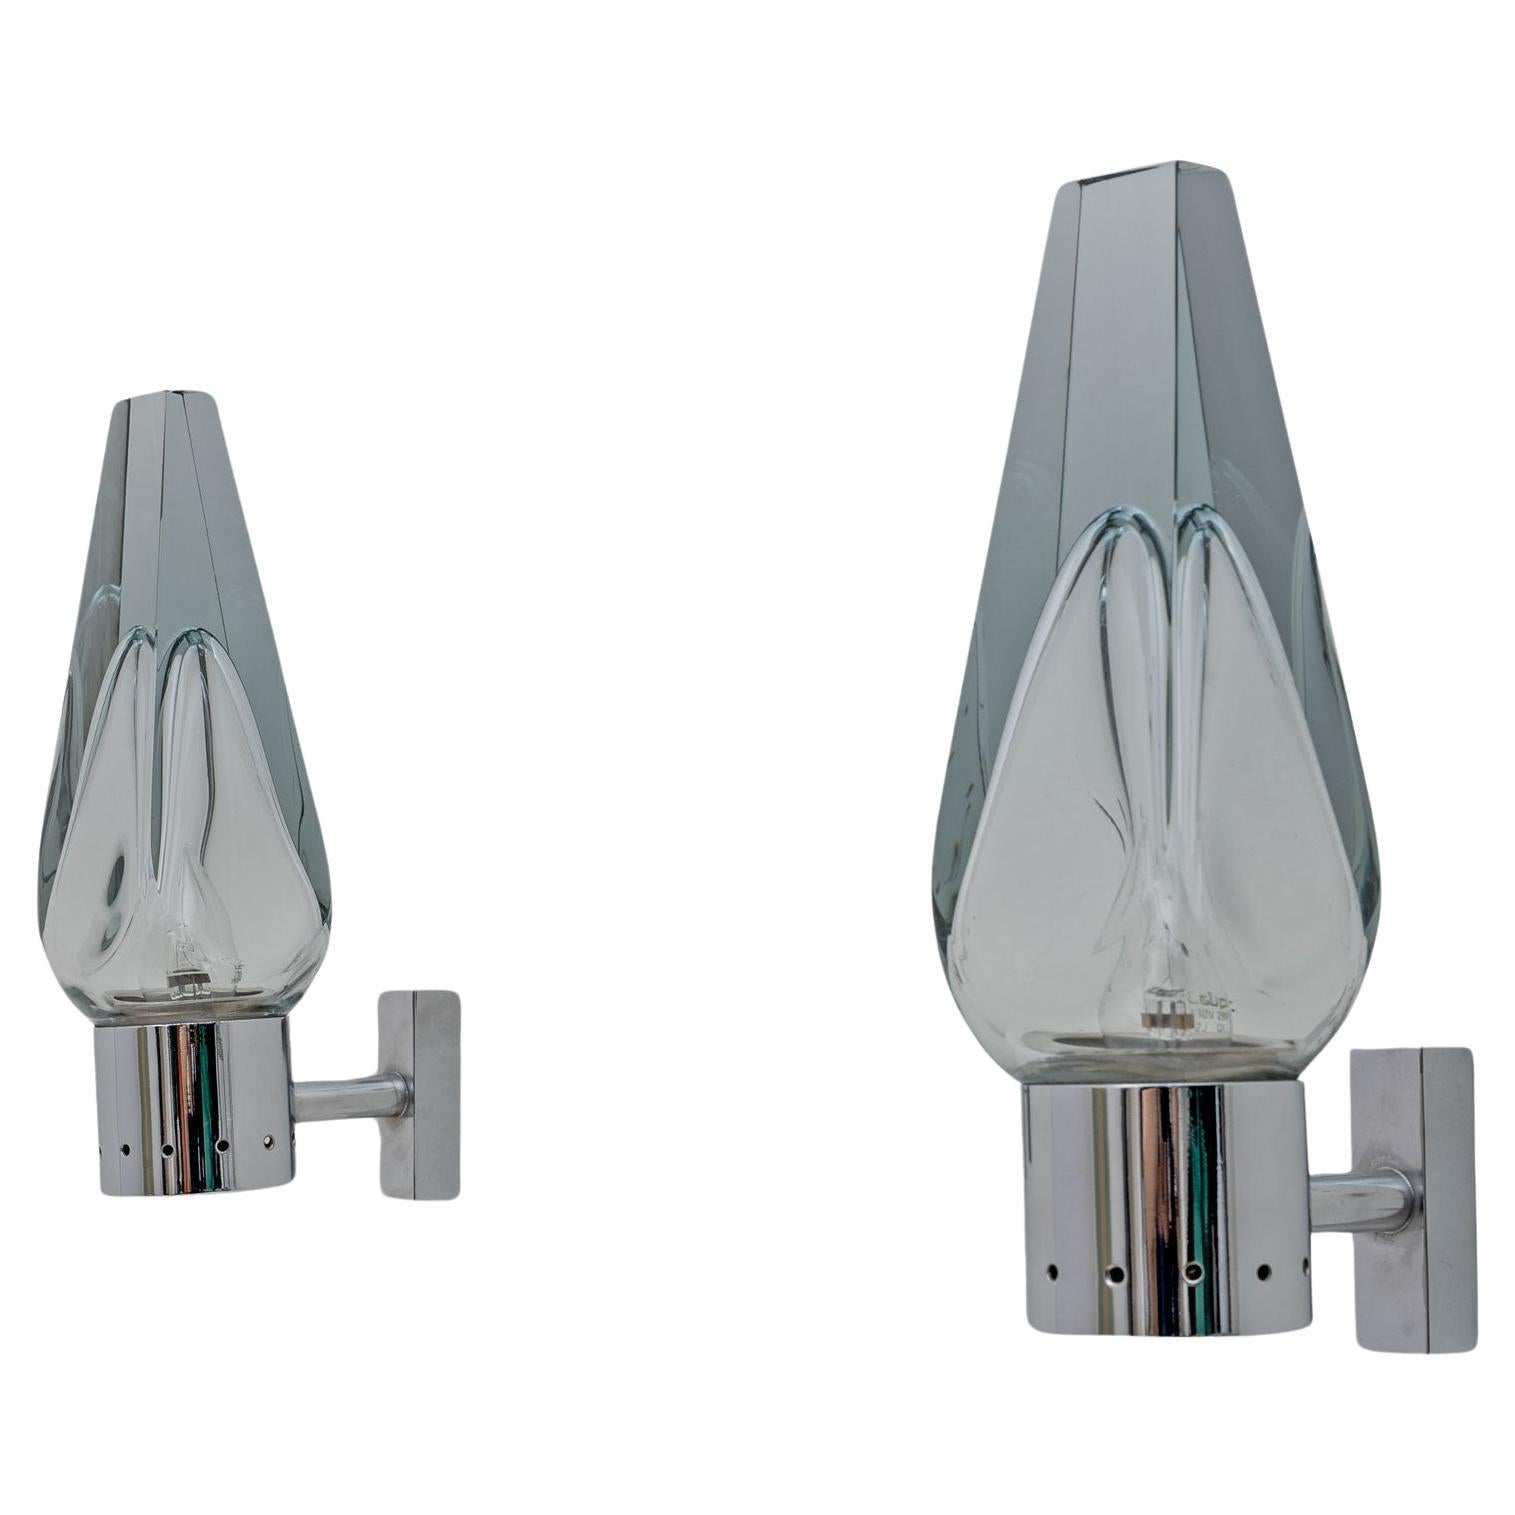 Pair of Mid-century Modern Murano Glass Sconces by Flavio Poli for Seguso, 1960s For Sale